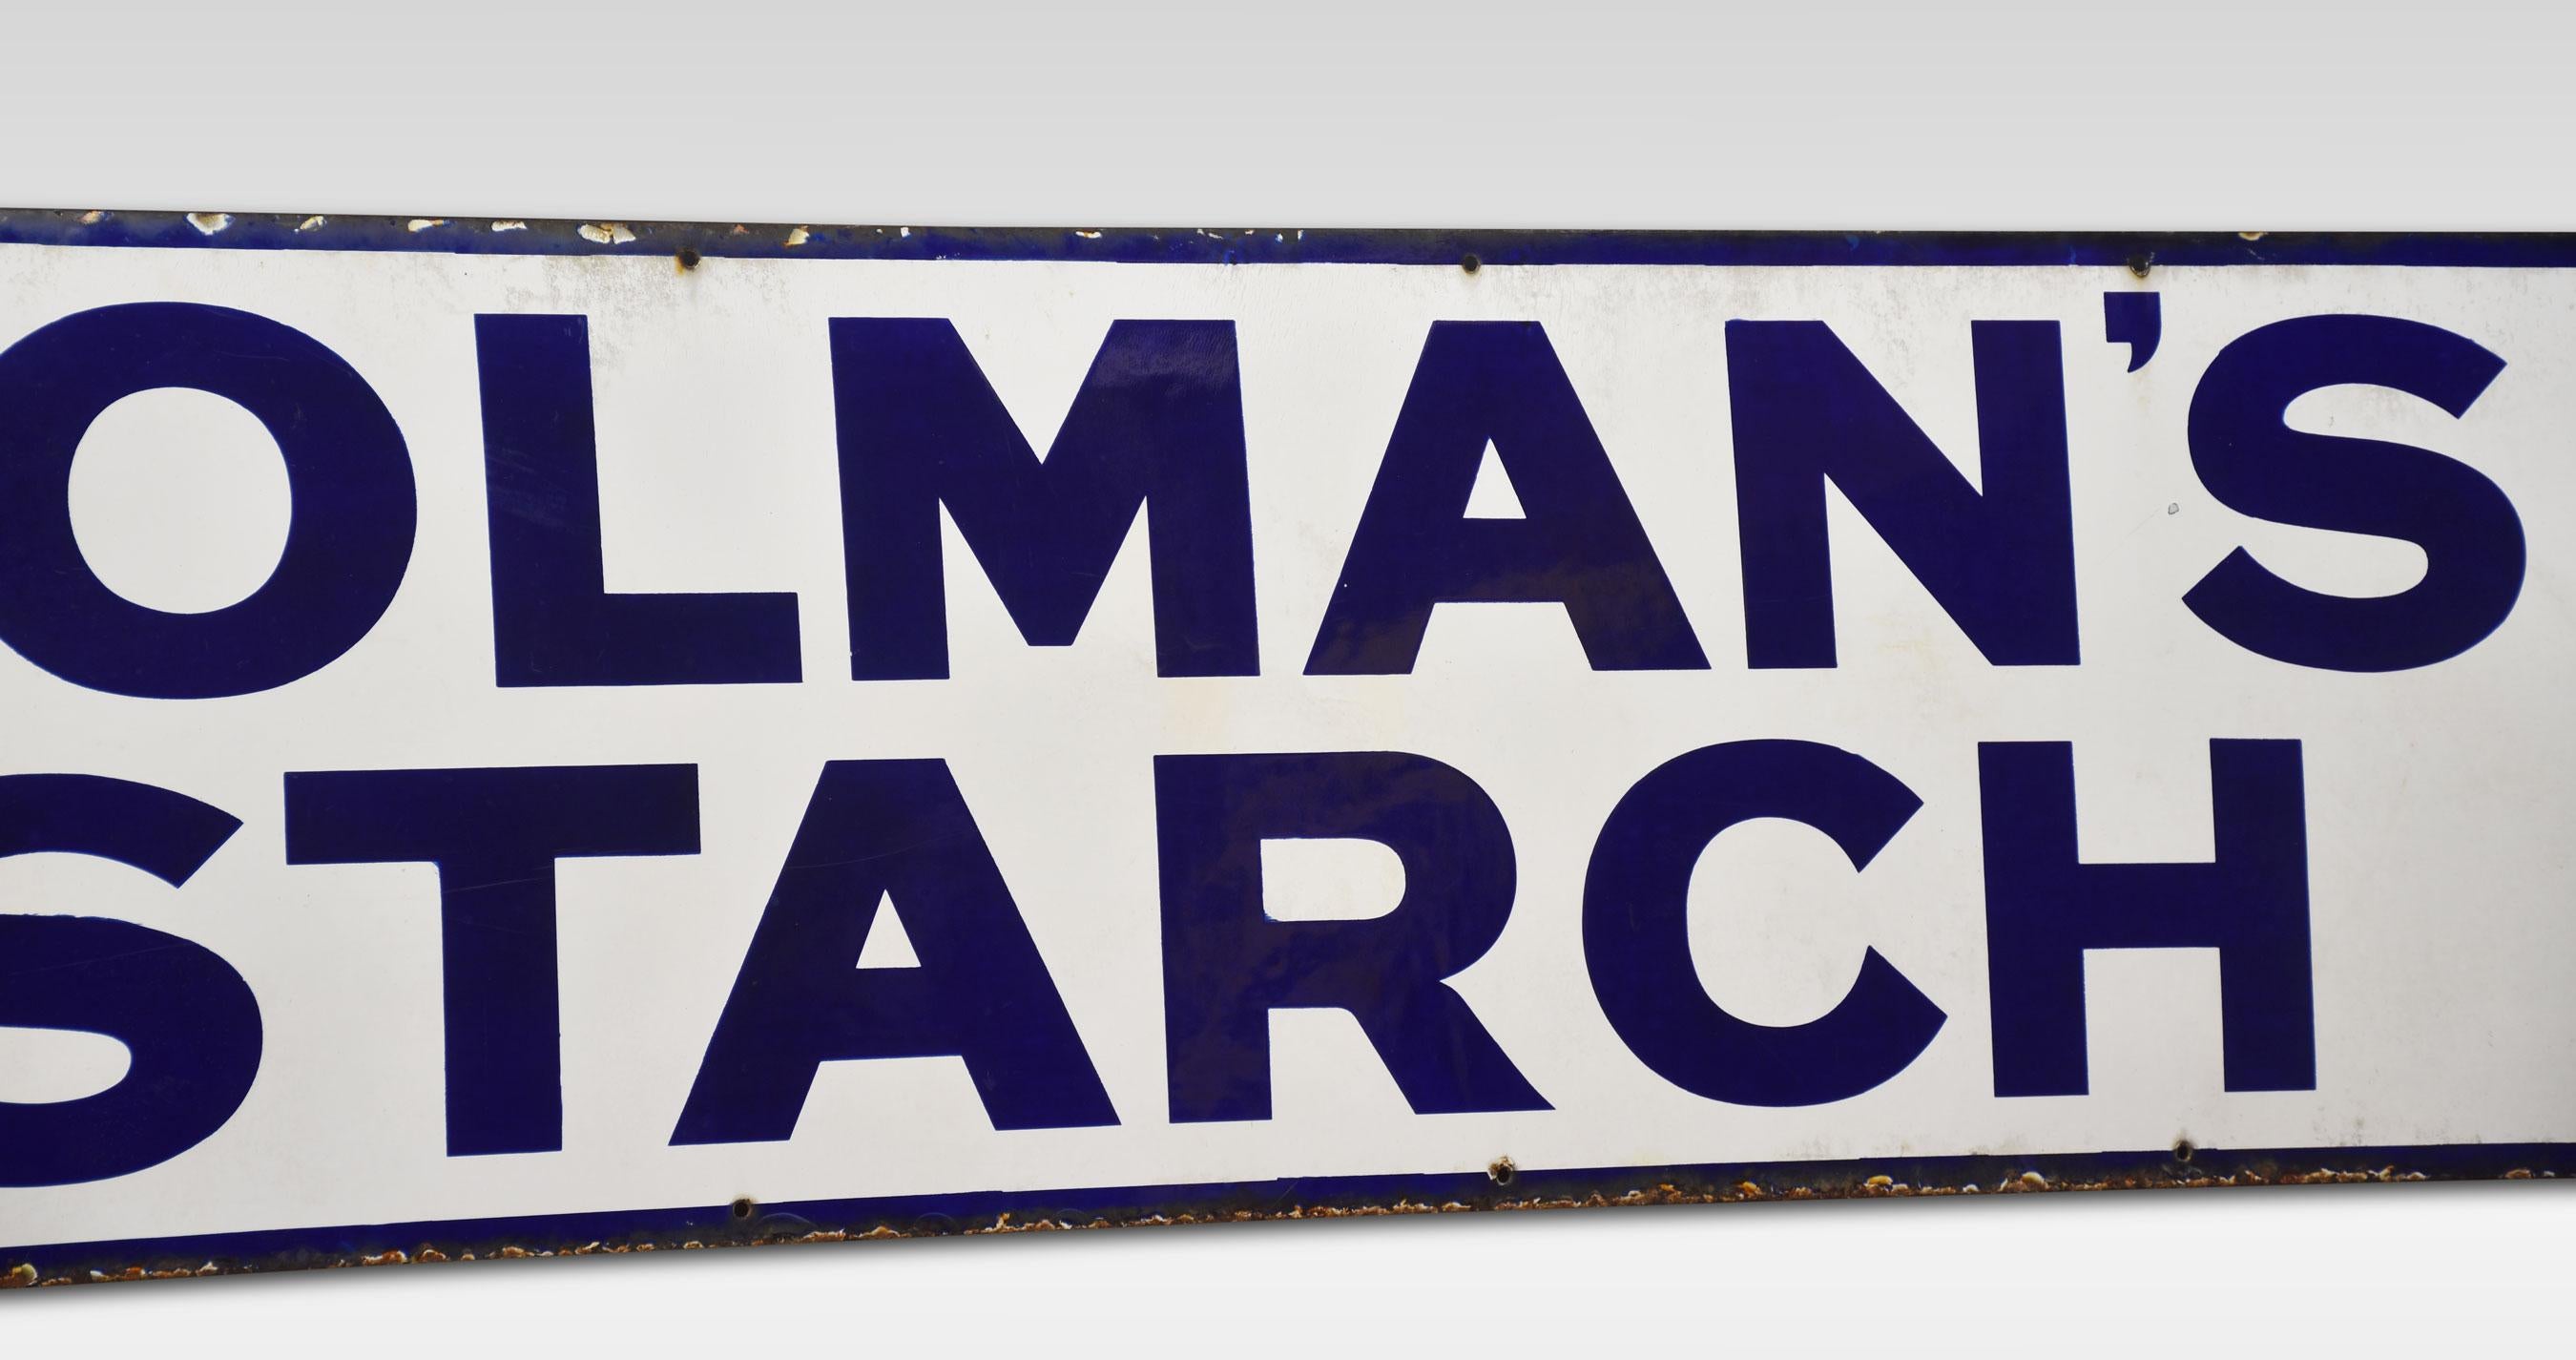 Enamel sign for Colman’s Starch, of rectangular form decorated in blue and white enamel.
Dimensions
Height 16 Inches
Width 62.5 Inches
Depth 0.5 Inches.